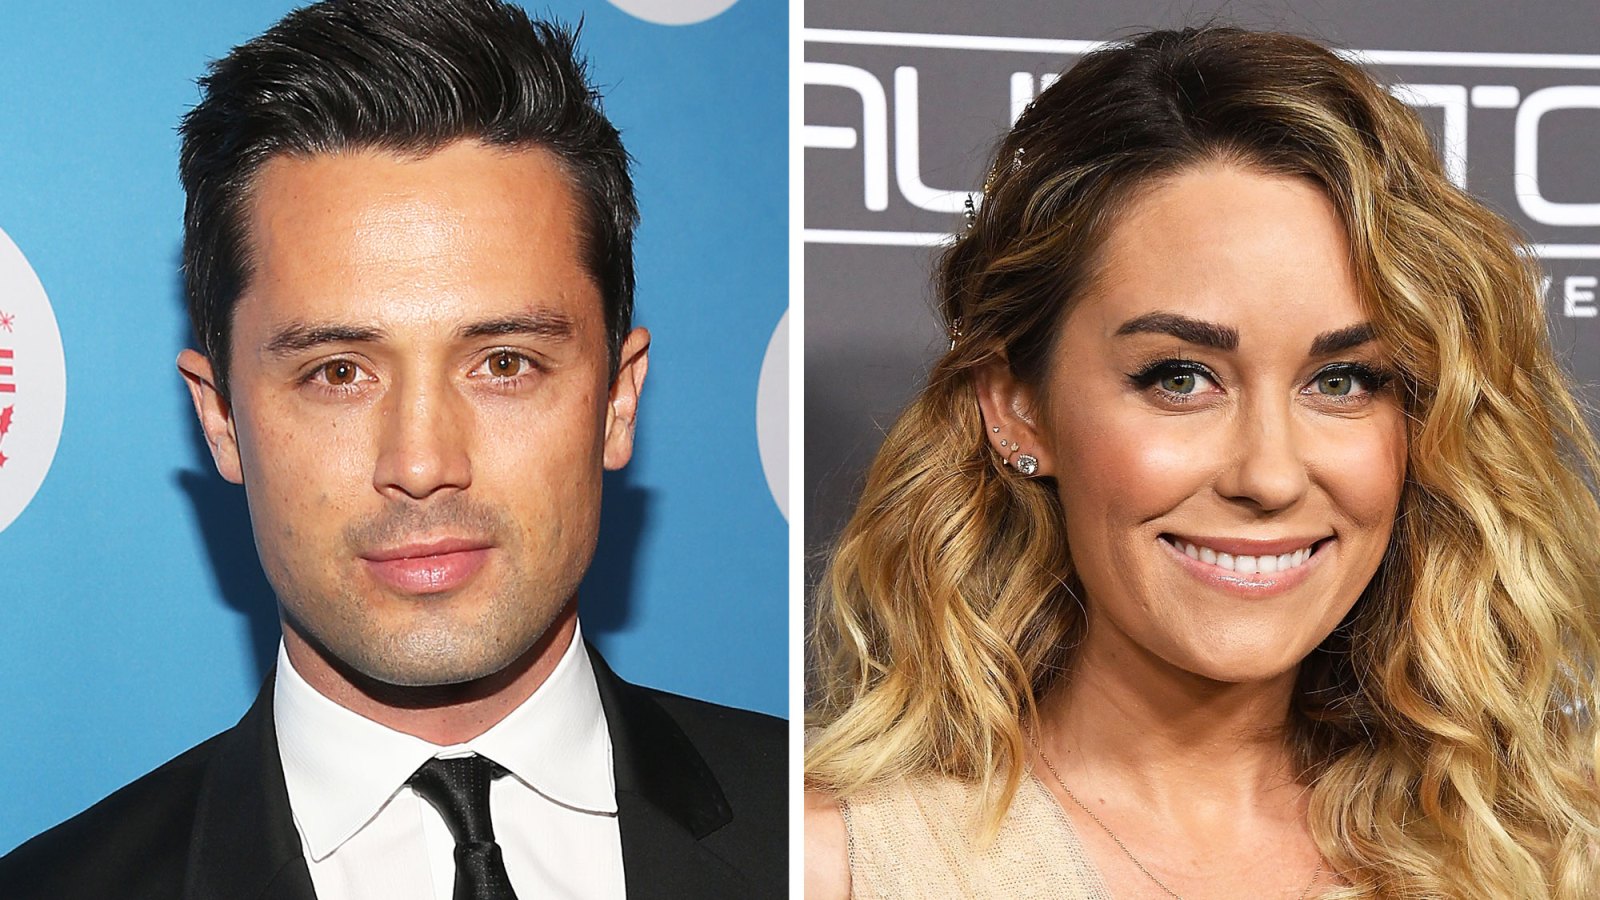 Stephen Colletti: Lauren Conrad 'Doesn't Need' to Do 'Hills' Reboot